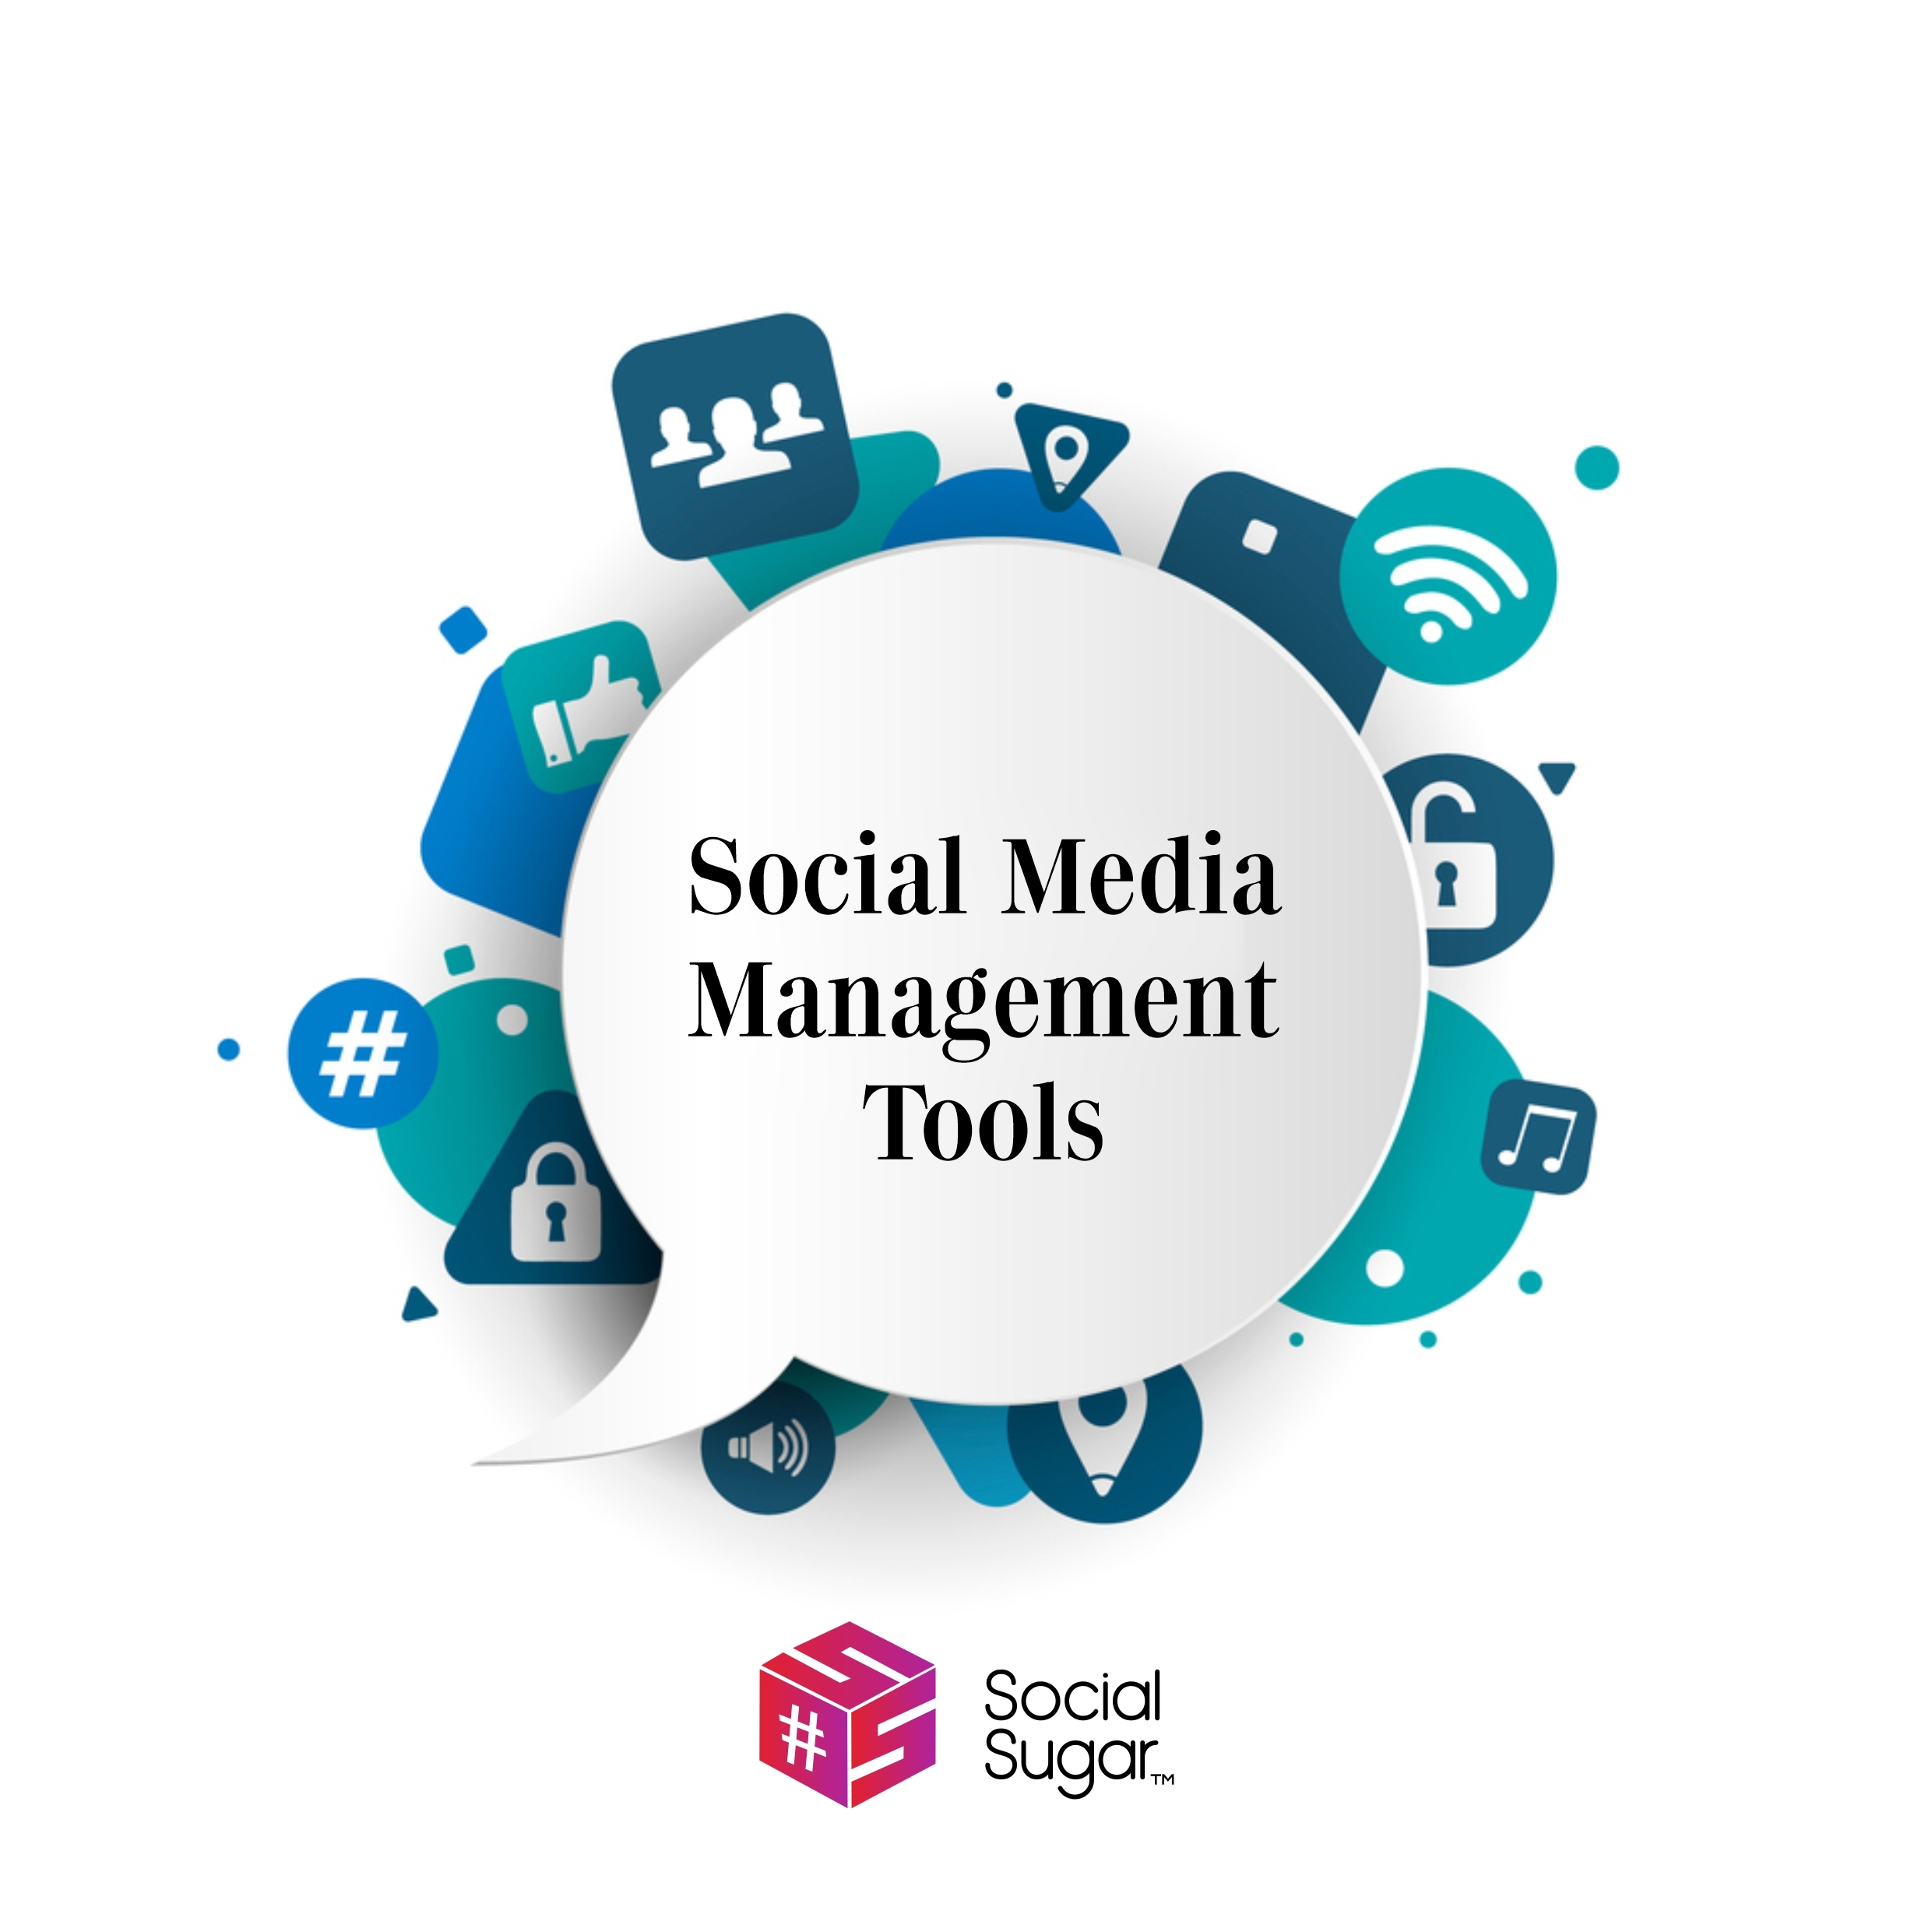 Best Social Media Management Tools: Based On Customers’ Reviews (2)